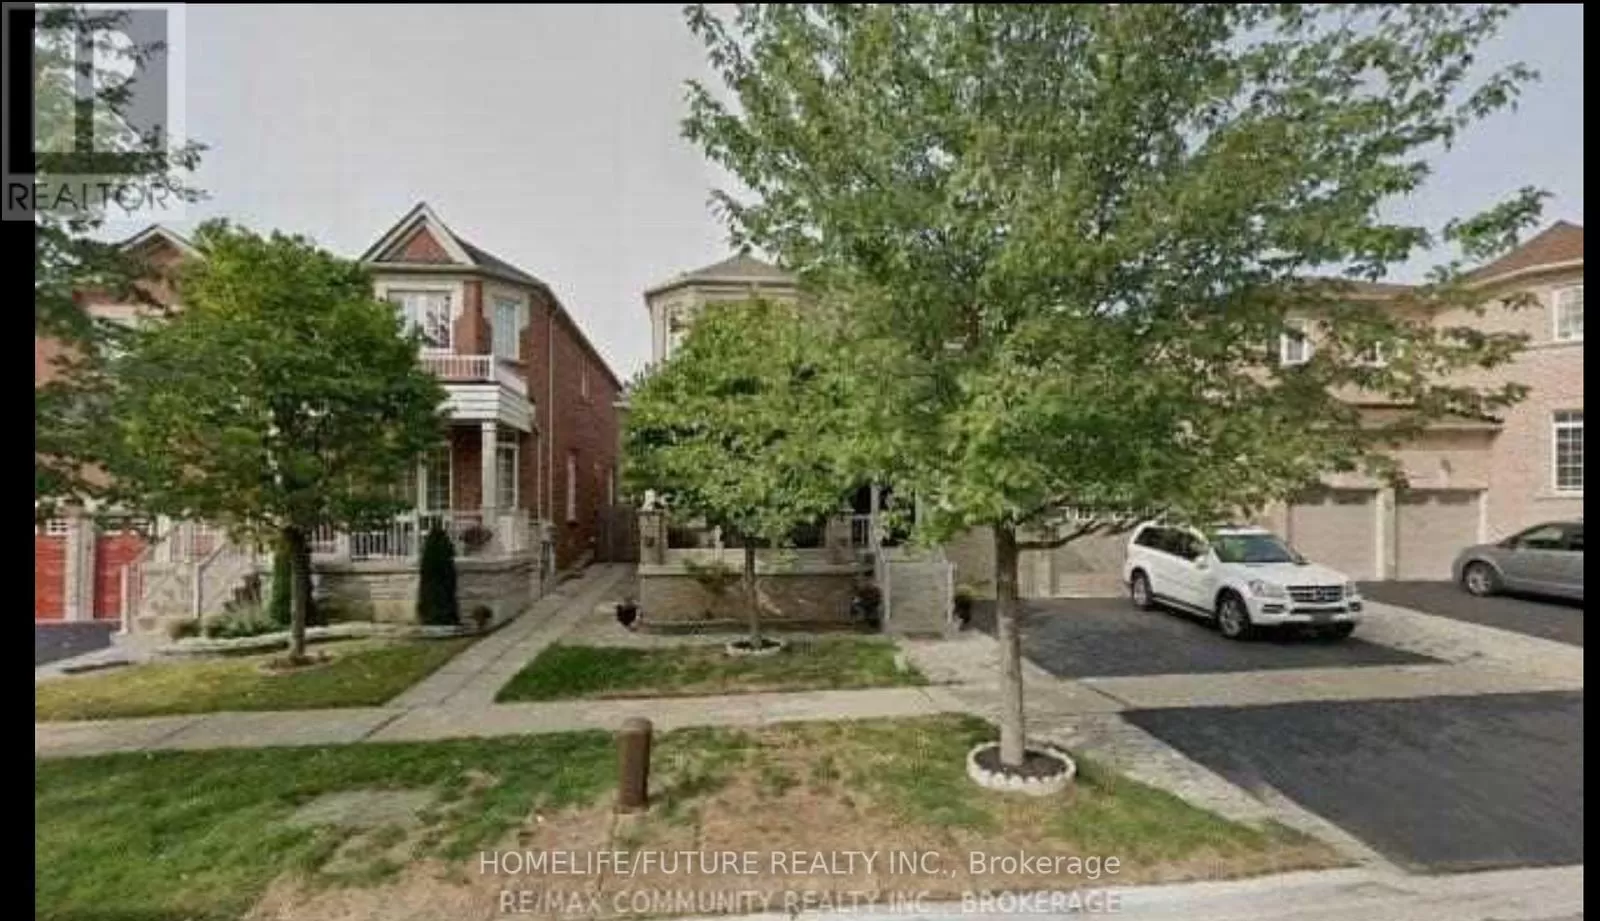 House for rent: Bsmt - 7 Josaly Drive, Toronto, Ontario M1C 2N6